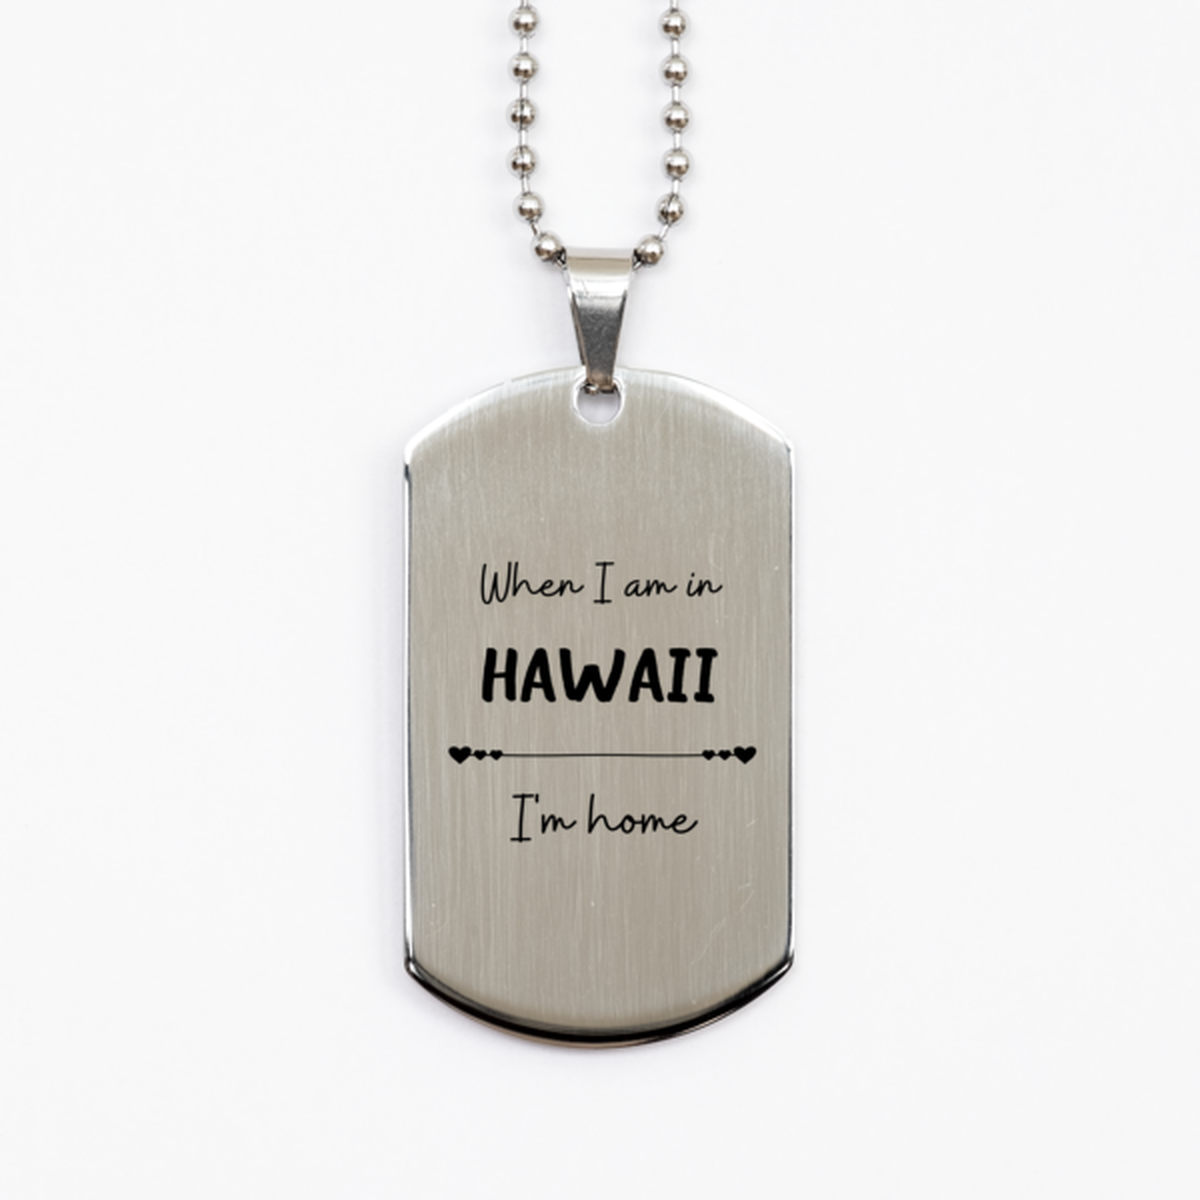 When I am in Hawaii I'm home Silver Dog Tag, Cheap Gifts For Hawaii, State Hawaii Birthday Gifts for Friends Coworker